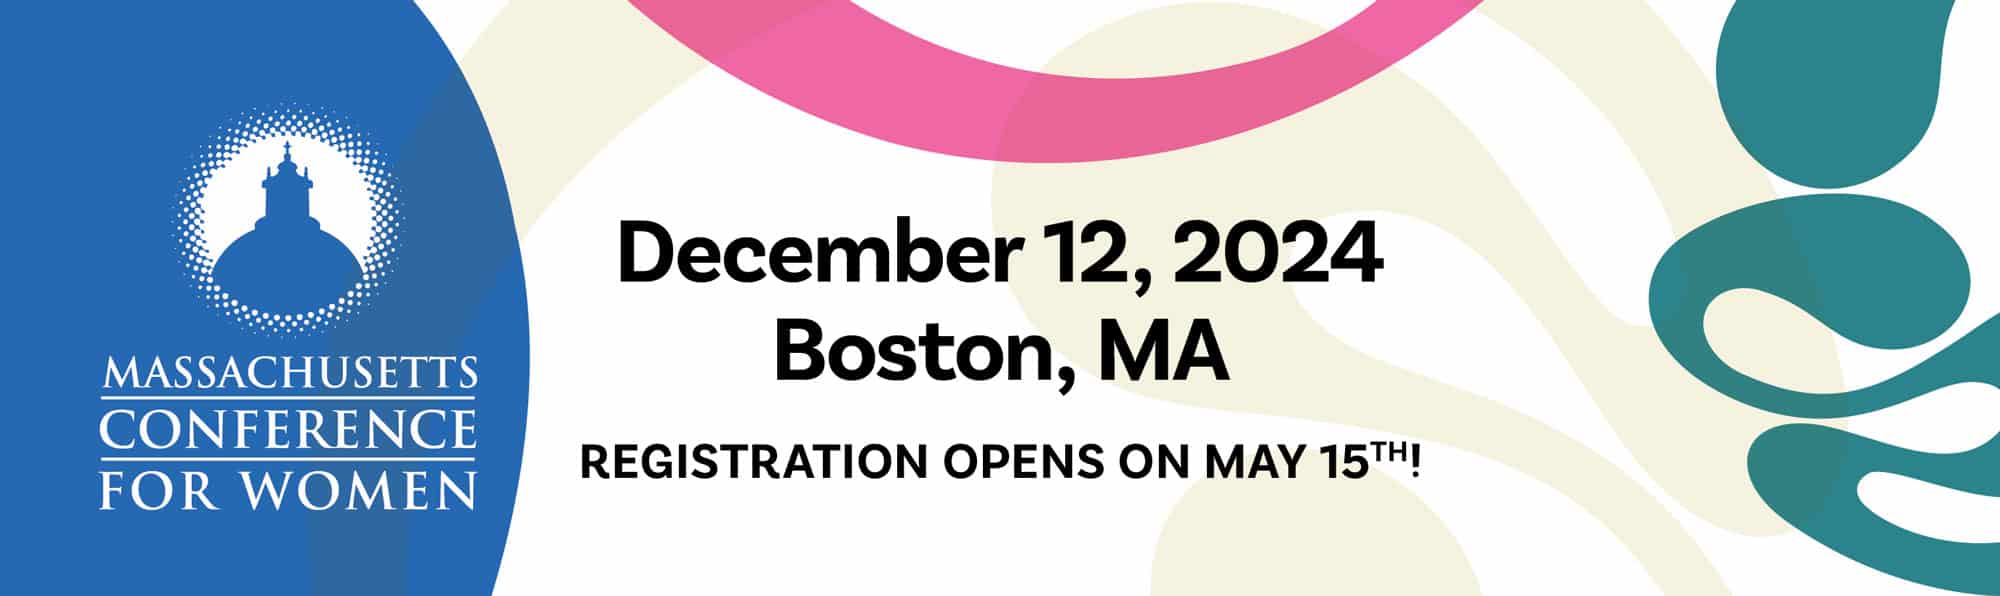 MA Conference for Women: December 12th. Boston, MA. Registration opens May 15th! Click here to get a reminder.